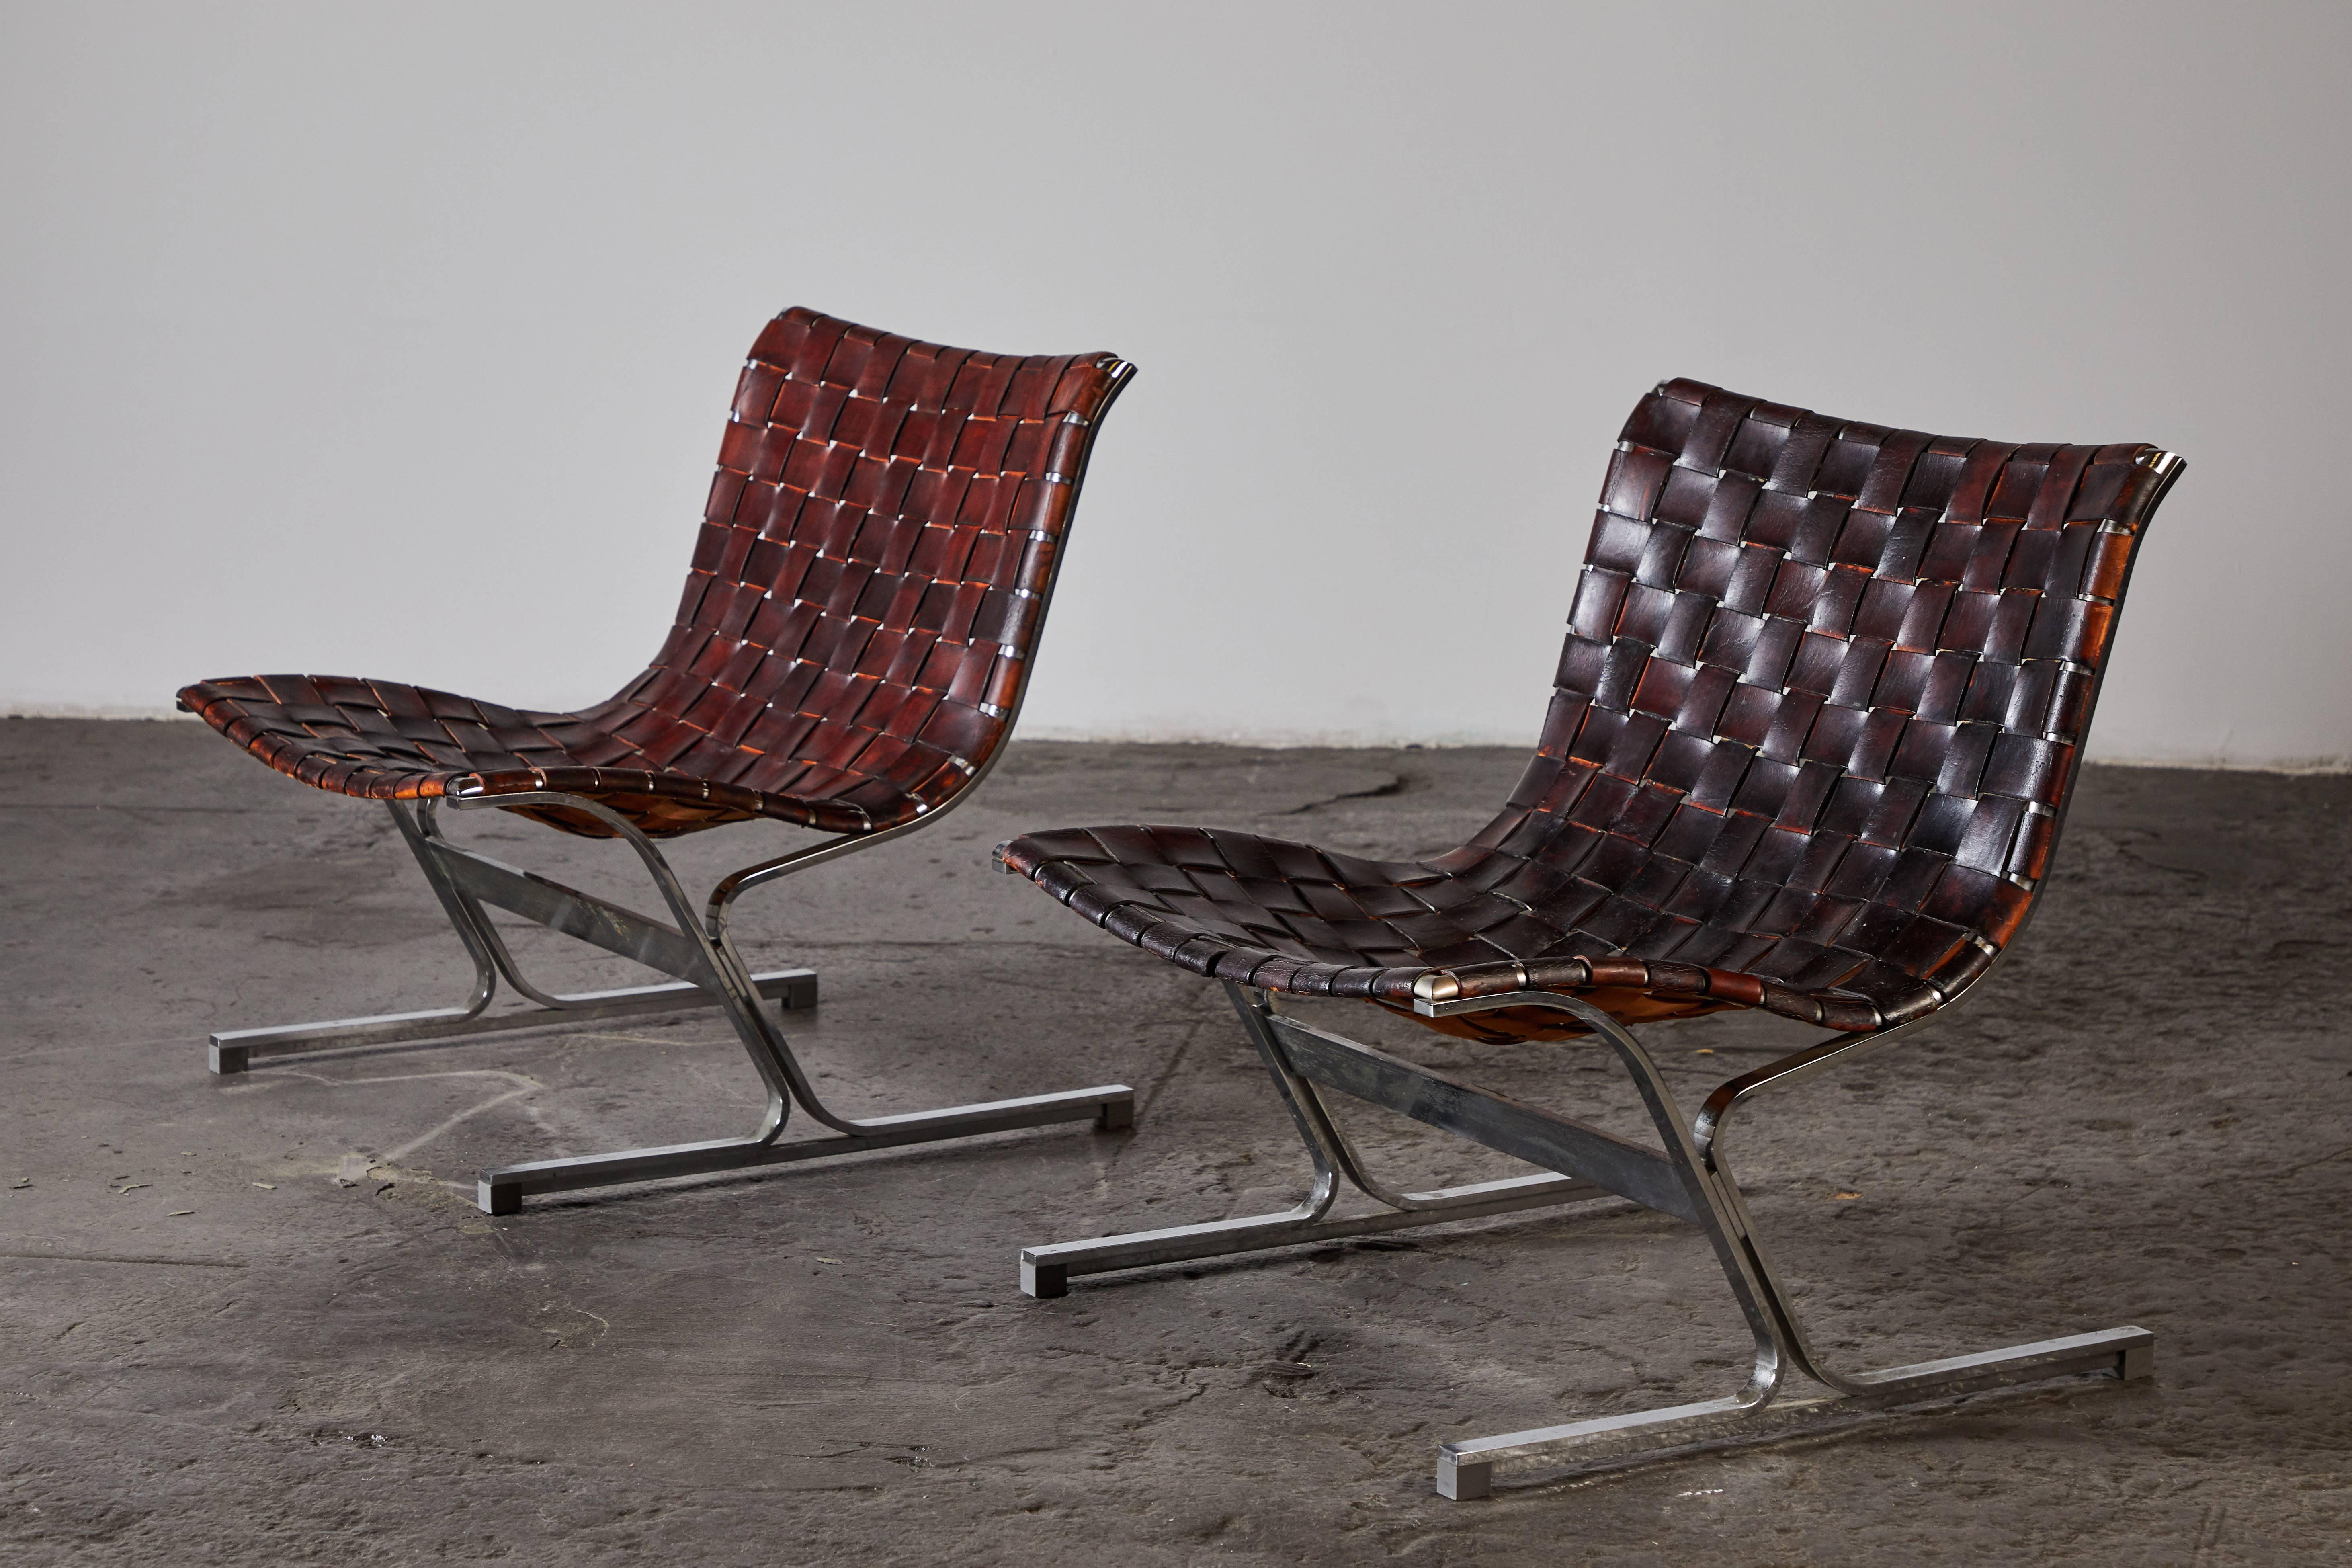 PLR1 woven leather and chrome-plated steel lounge chairs by Ross Littell for ICF, Milano. Made in Italy, circa 1960s.